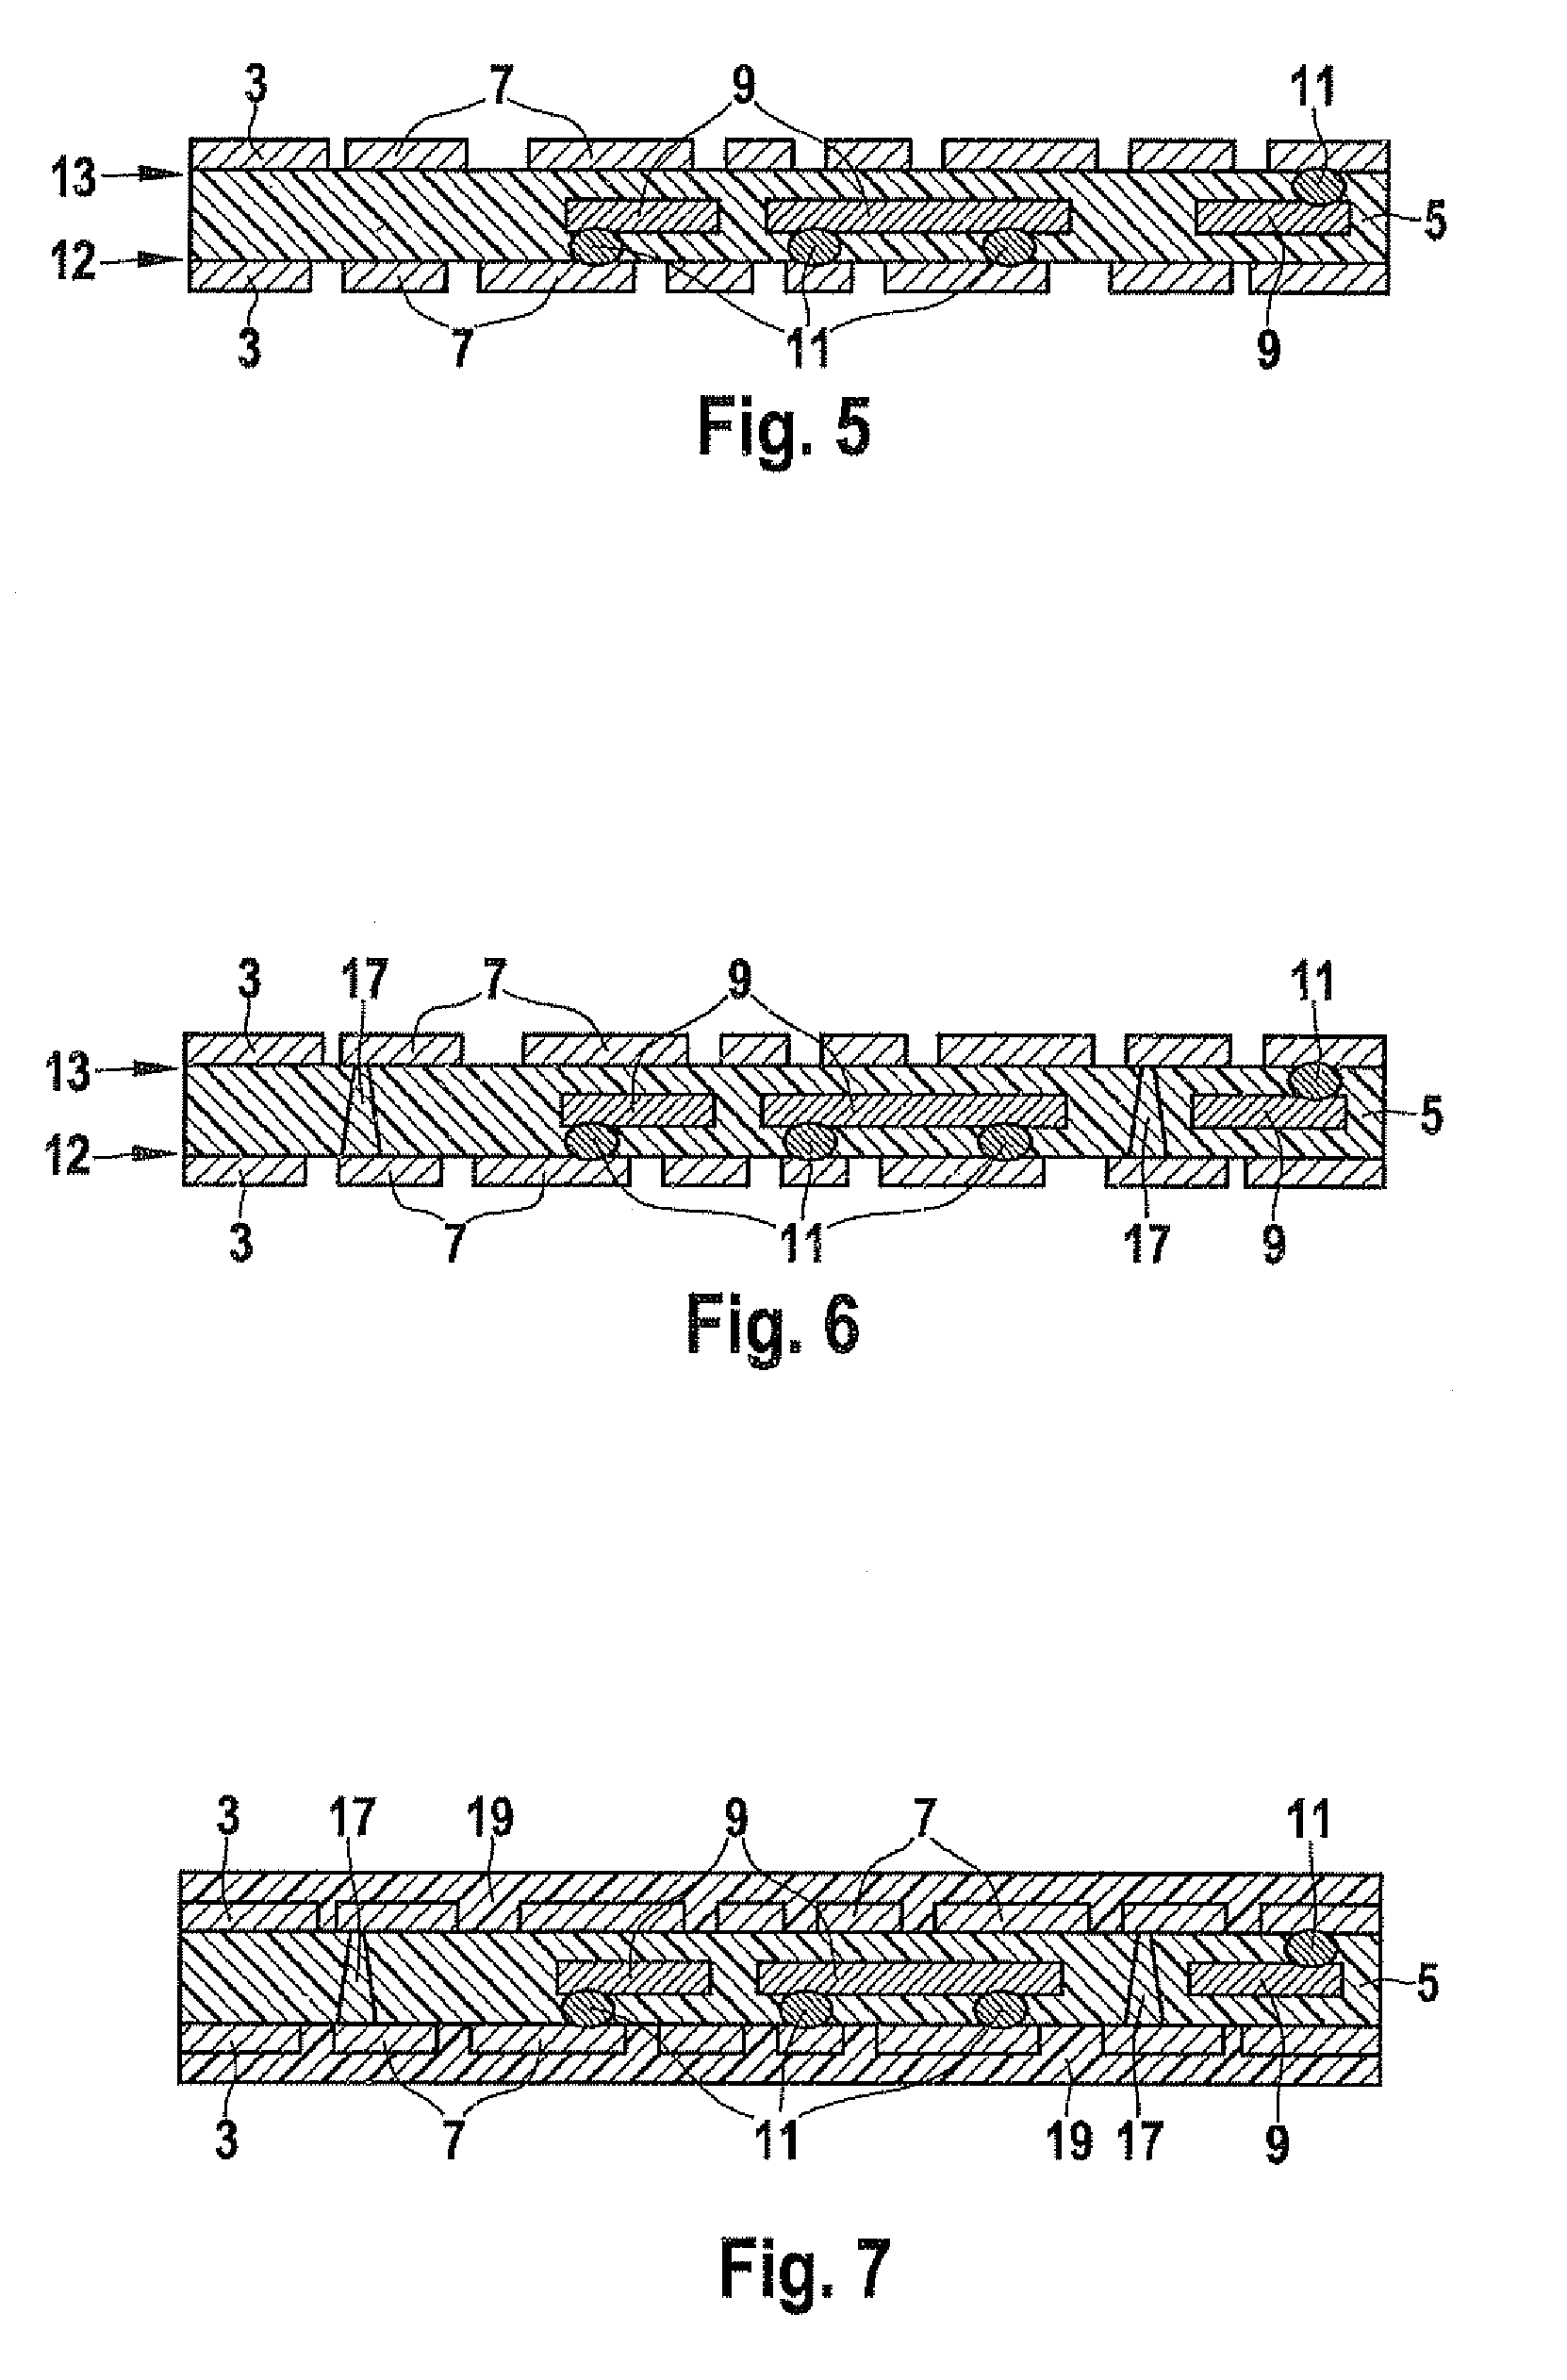 Method for manufacturing an electronic assembly